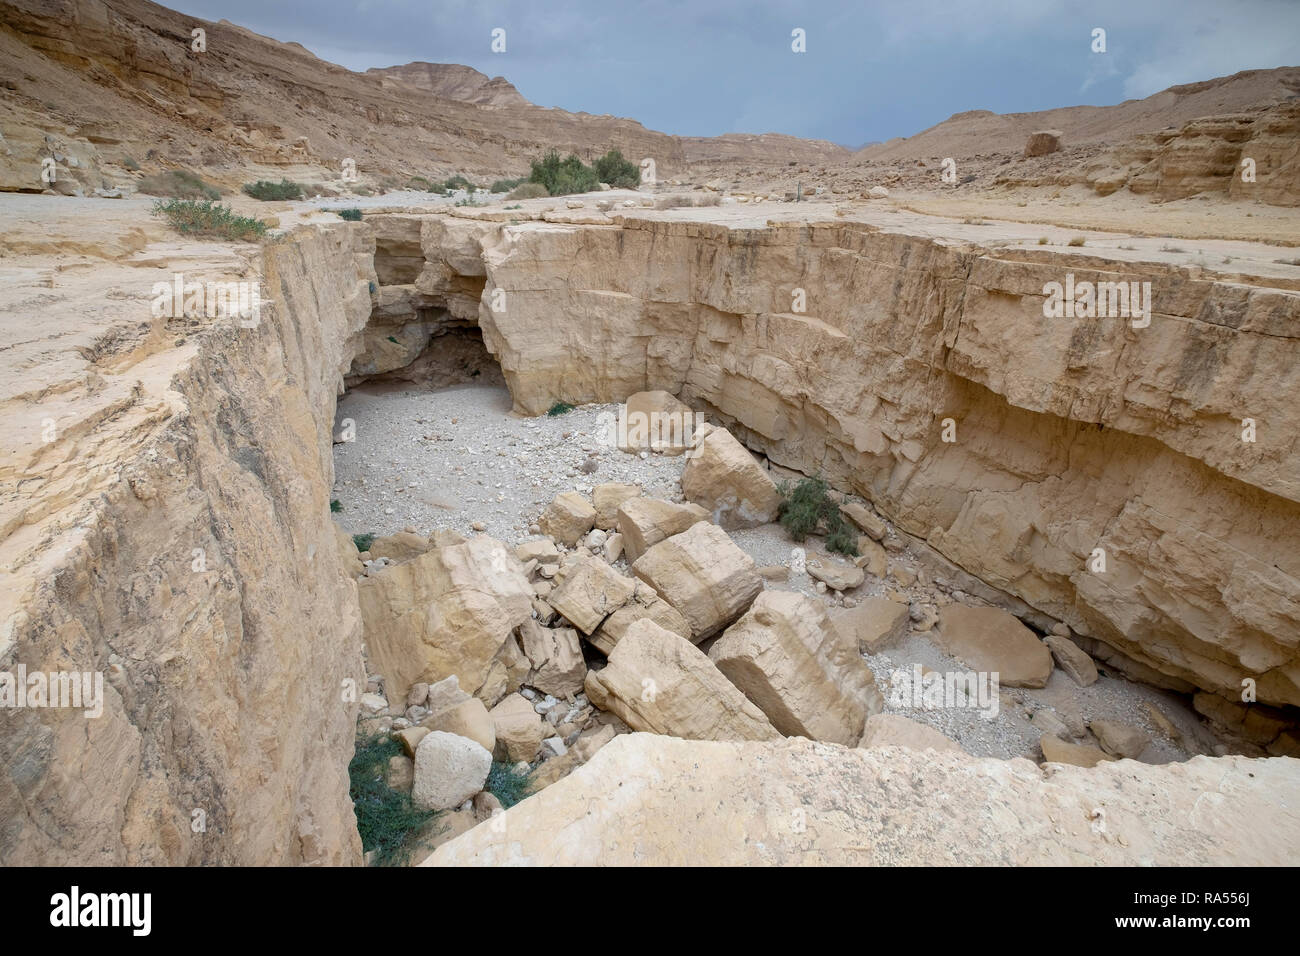 A deep dry river gorge cut in the dry sandstone by flood water. The only water that flows into the Dead Sea, Israel Stock Photo